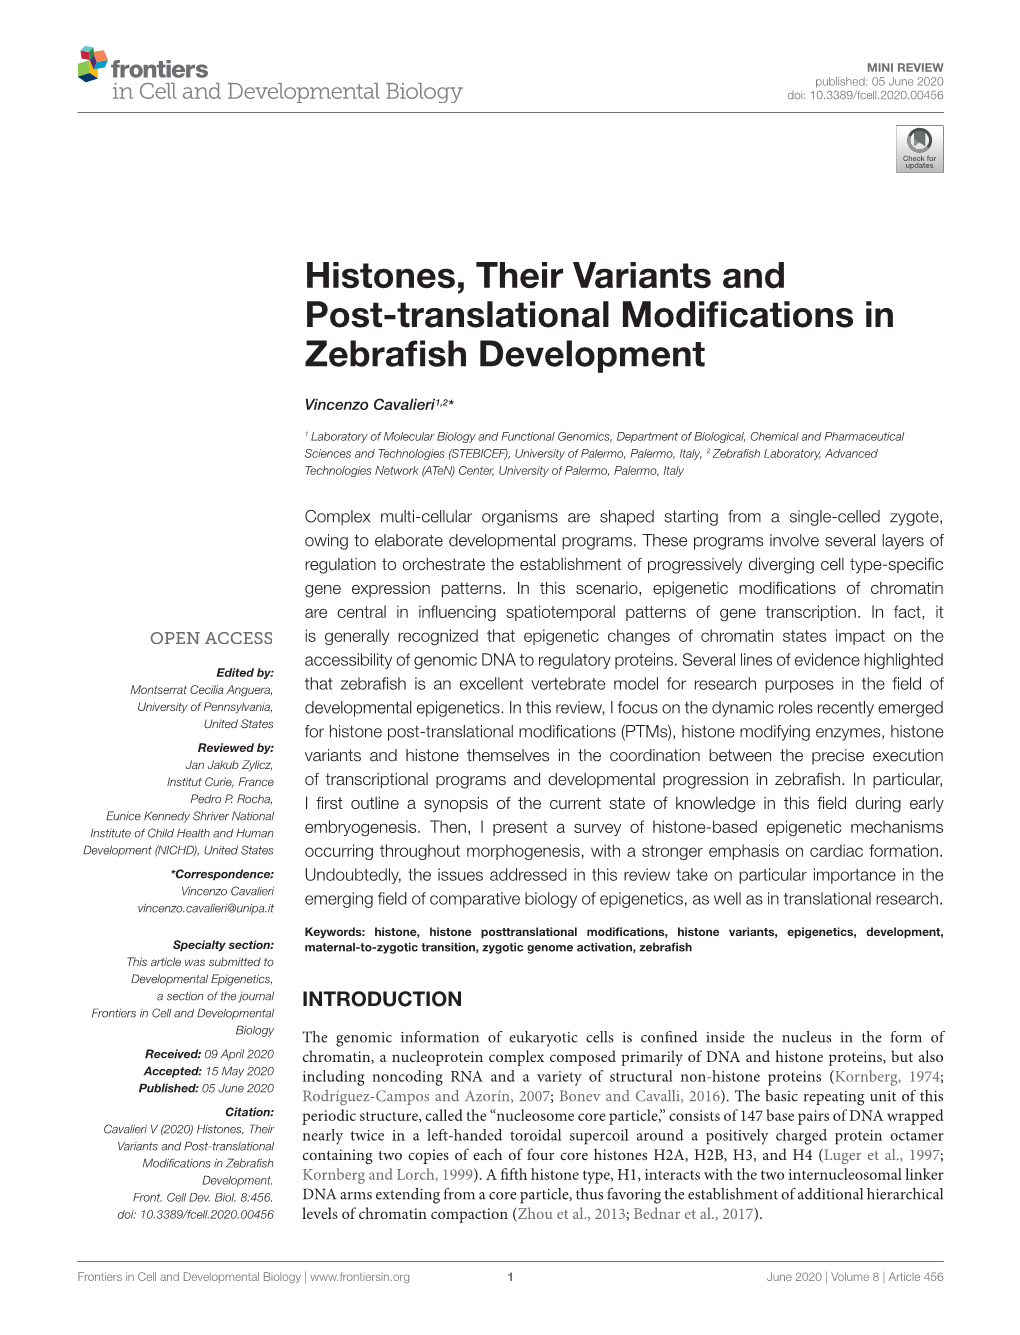 Histones, Their Variants and Post-Translational Modifications in Zebrafish Development